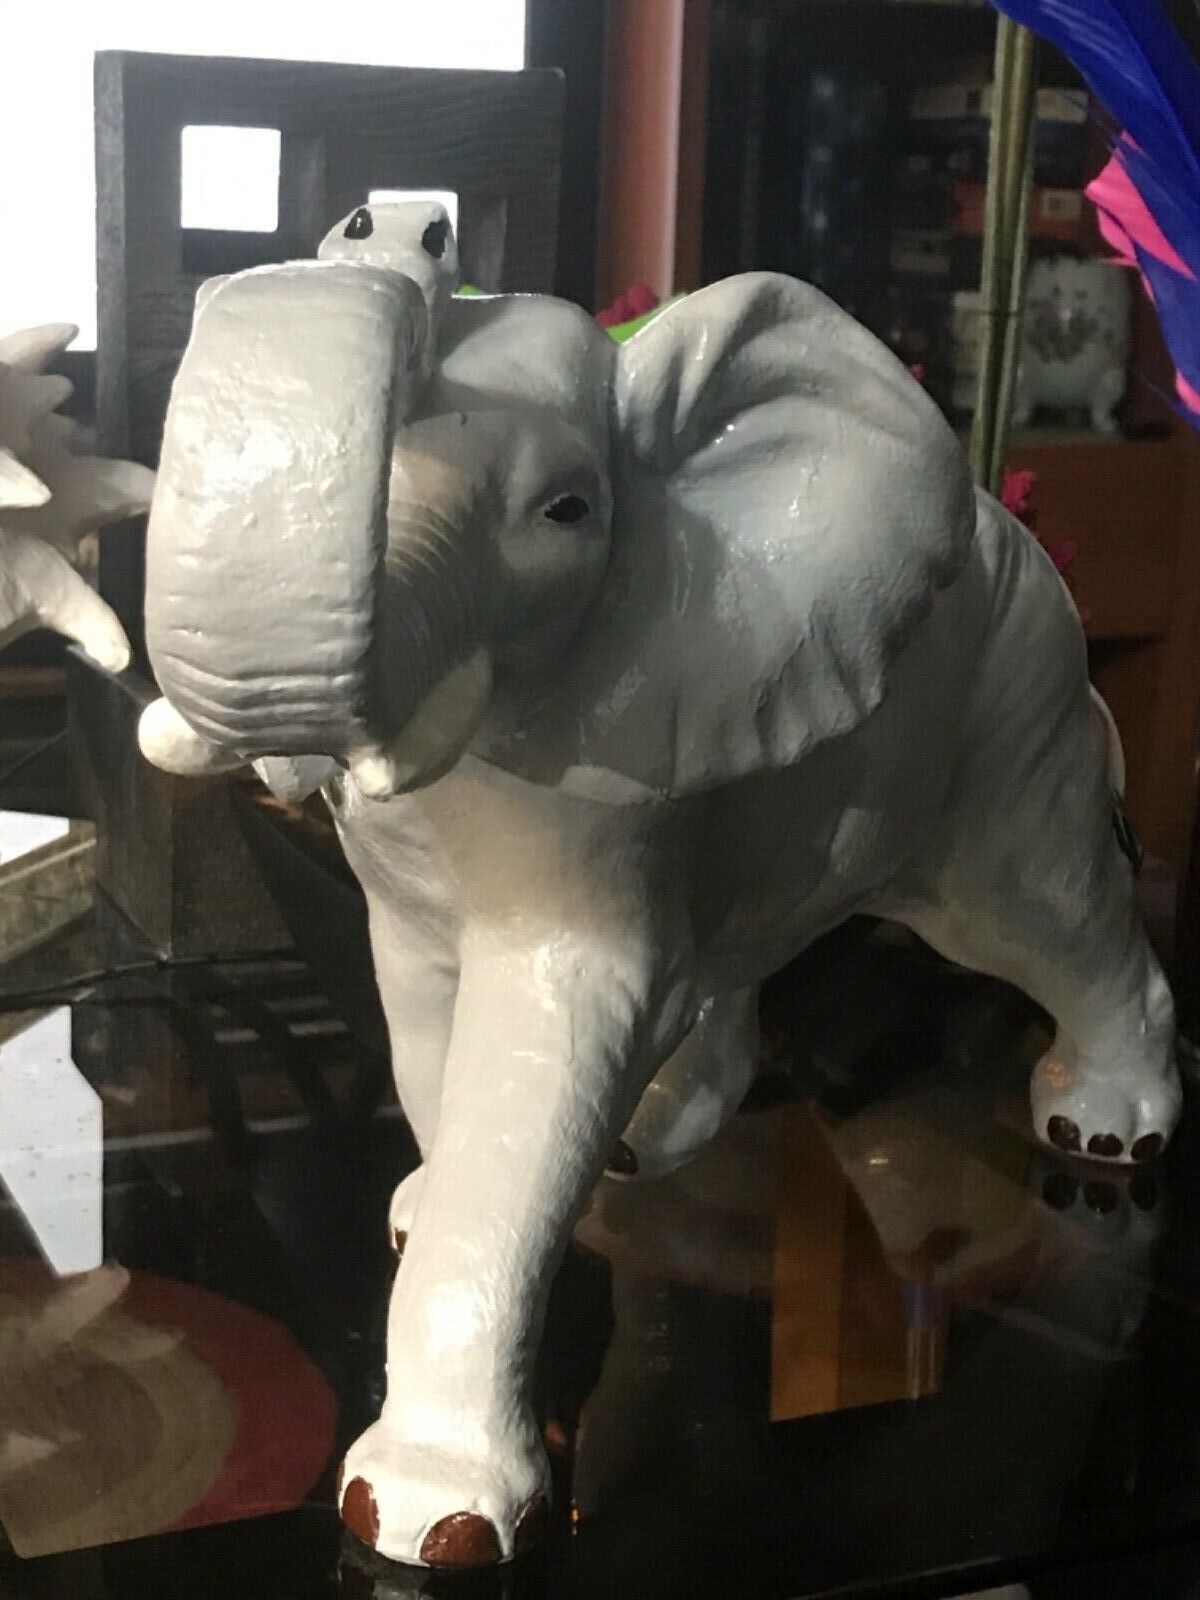 BEAUTIFUL ELEPHANT HEAVY SOLID CONCRETE MOLDED / L.16” x W. 8” x H. 10” INCHES